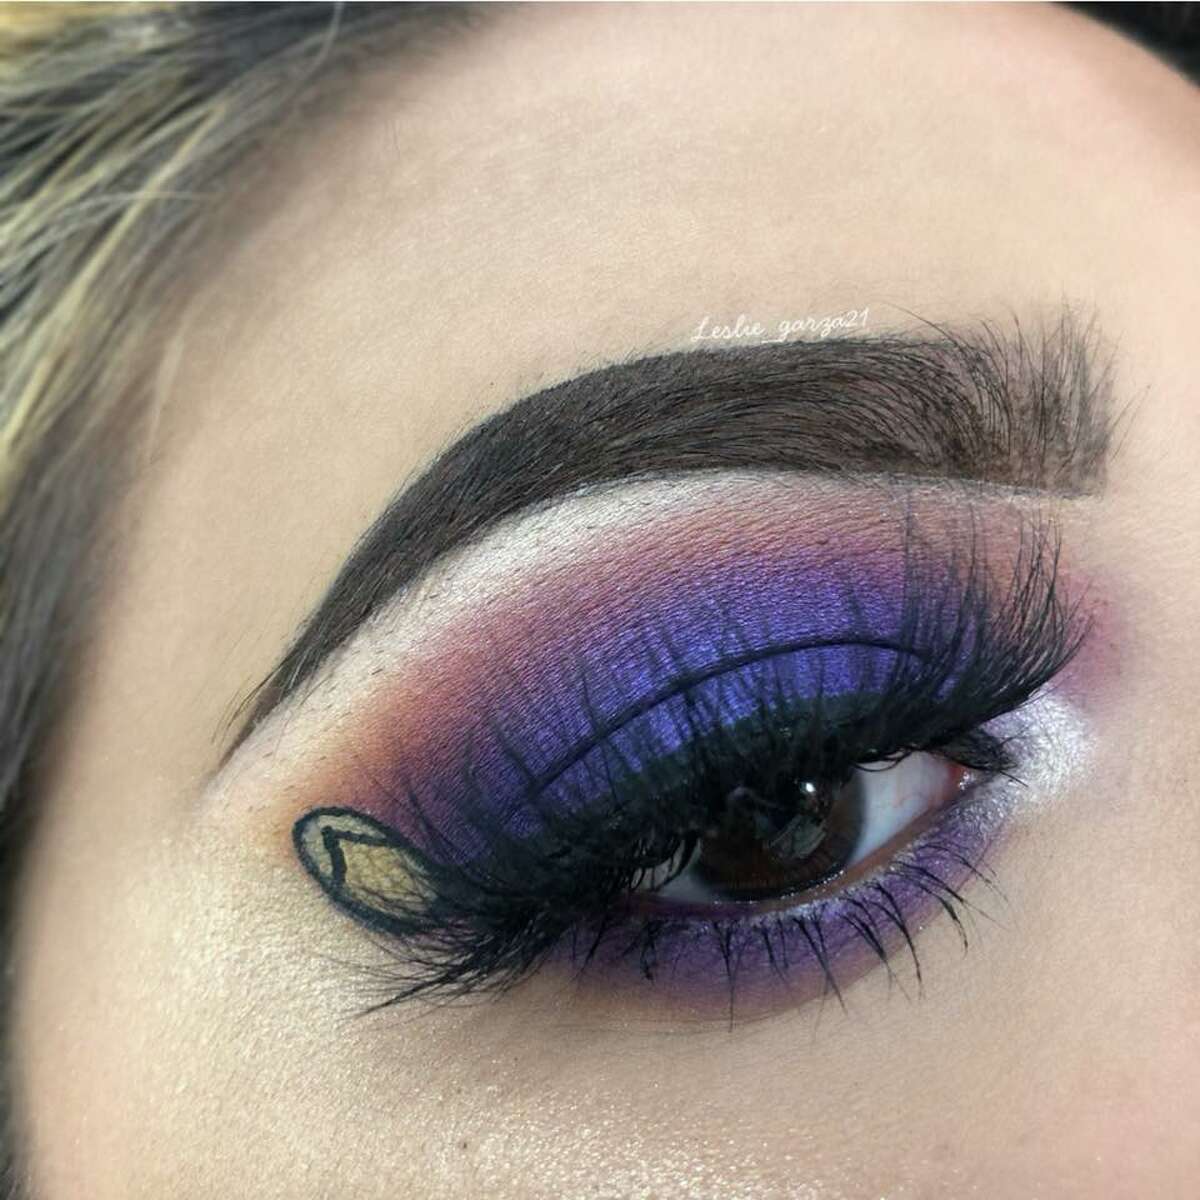 Leslie Garza, from San Antonio, says makeup is her hobby. While brainstorming content for her Facebook and Instagram pages, she came up with the idea to incorporate her childhood enemy, la chancla, into a Mother's Day-themed eyeshadow design.